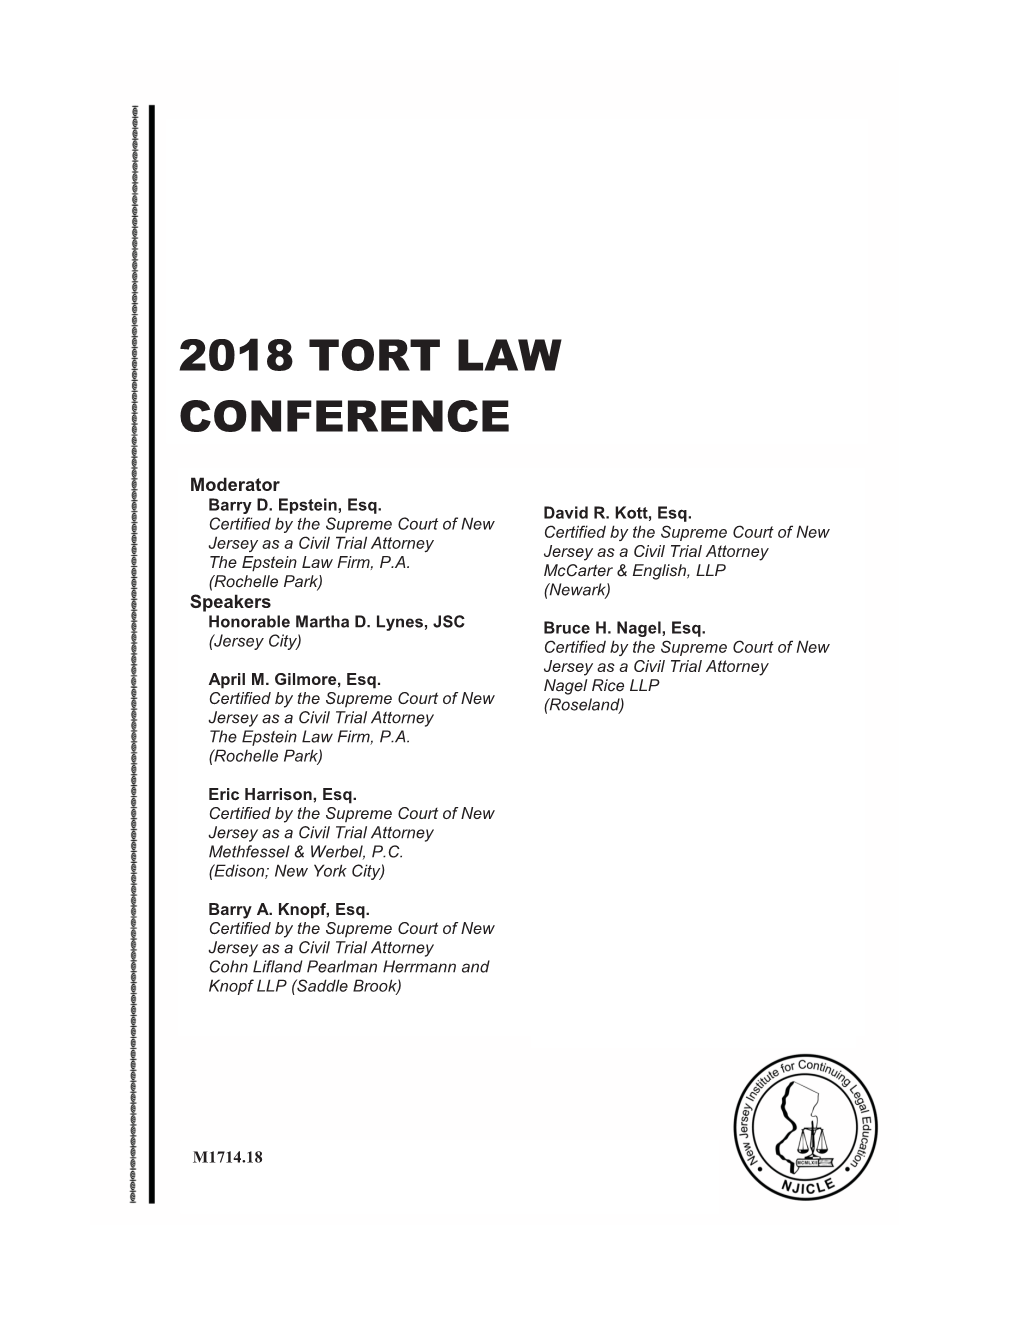 2018 Tort Law Conference